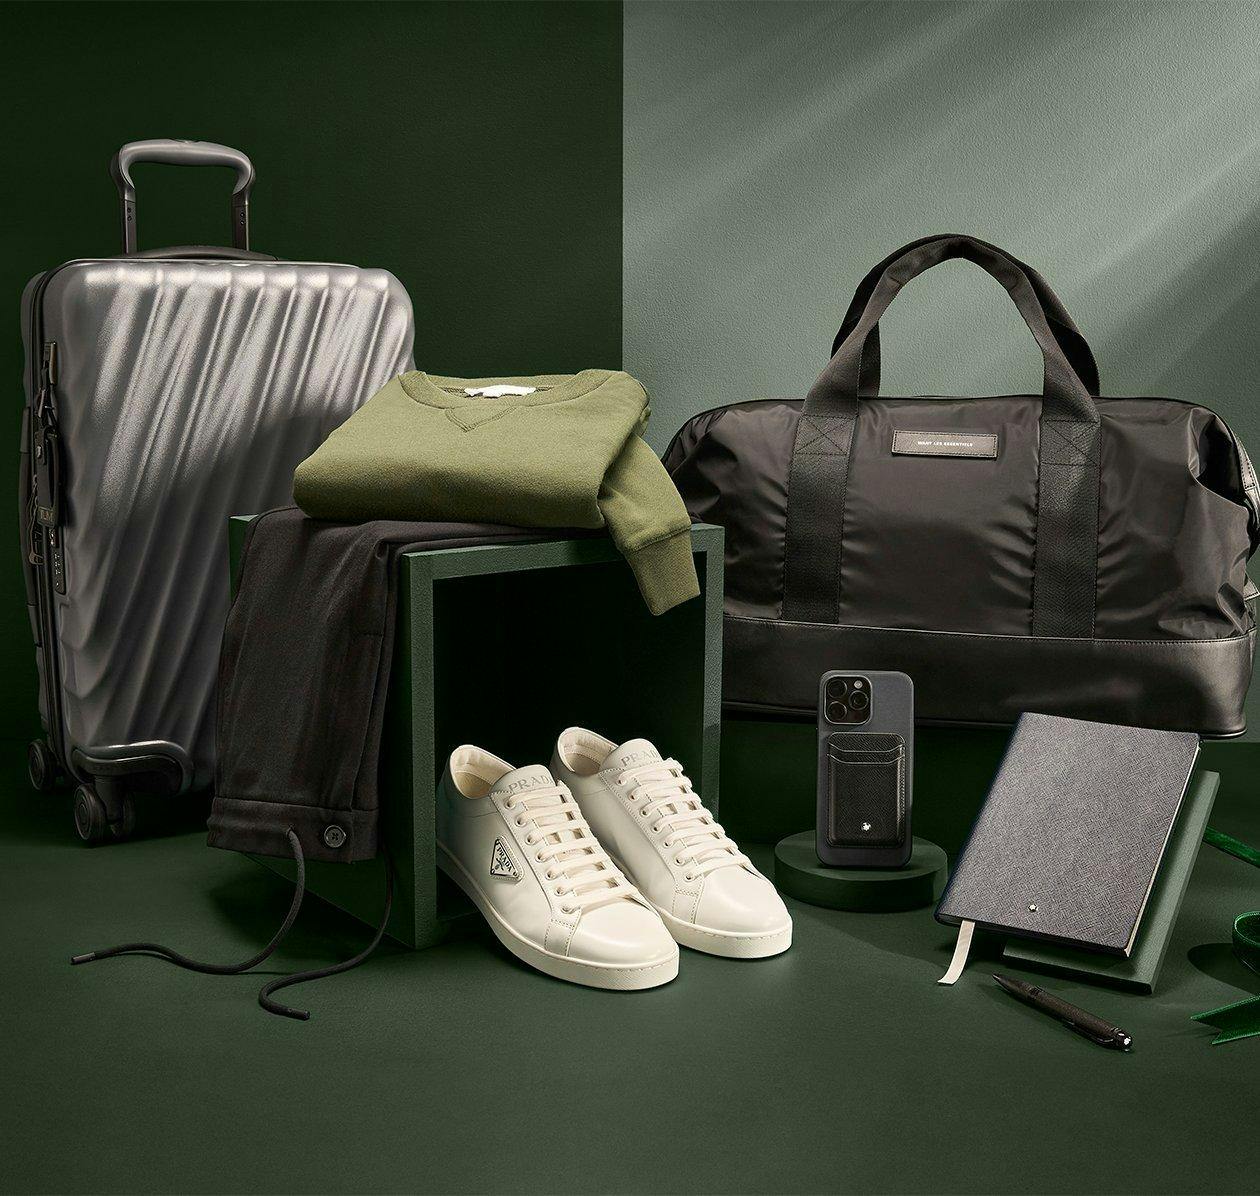 Prada white sneakers, iPhone case, grey notebook and pen, green sweater, Tumi suitcase, and black pants